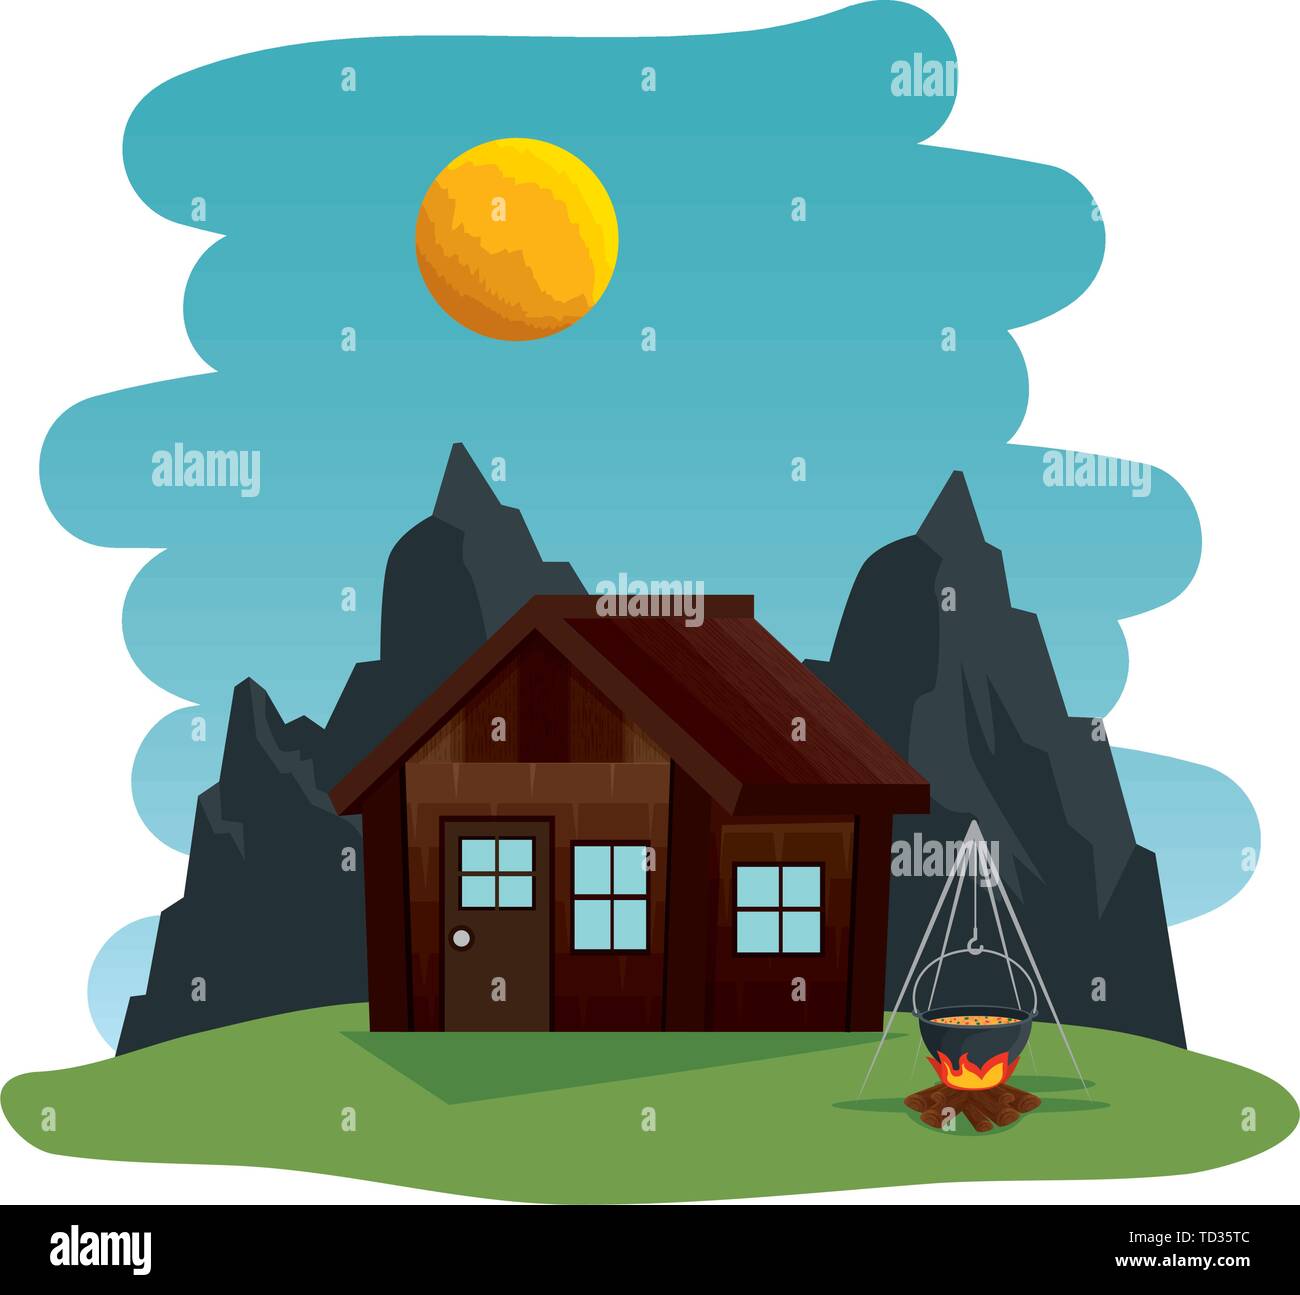 camping zone with log cabing and campfire scene Stock Vector